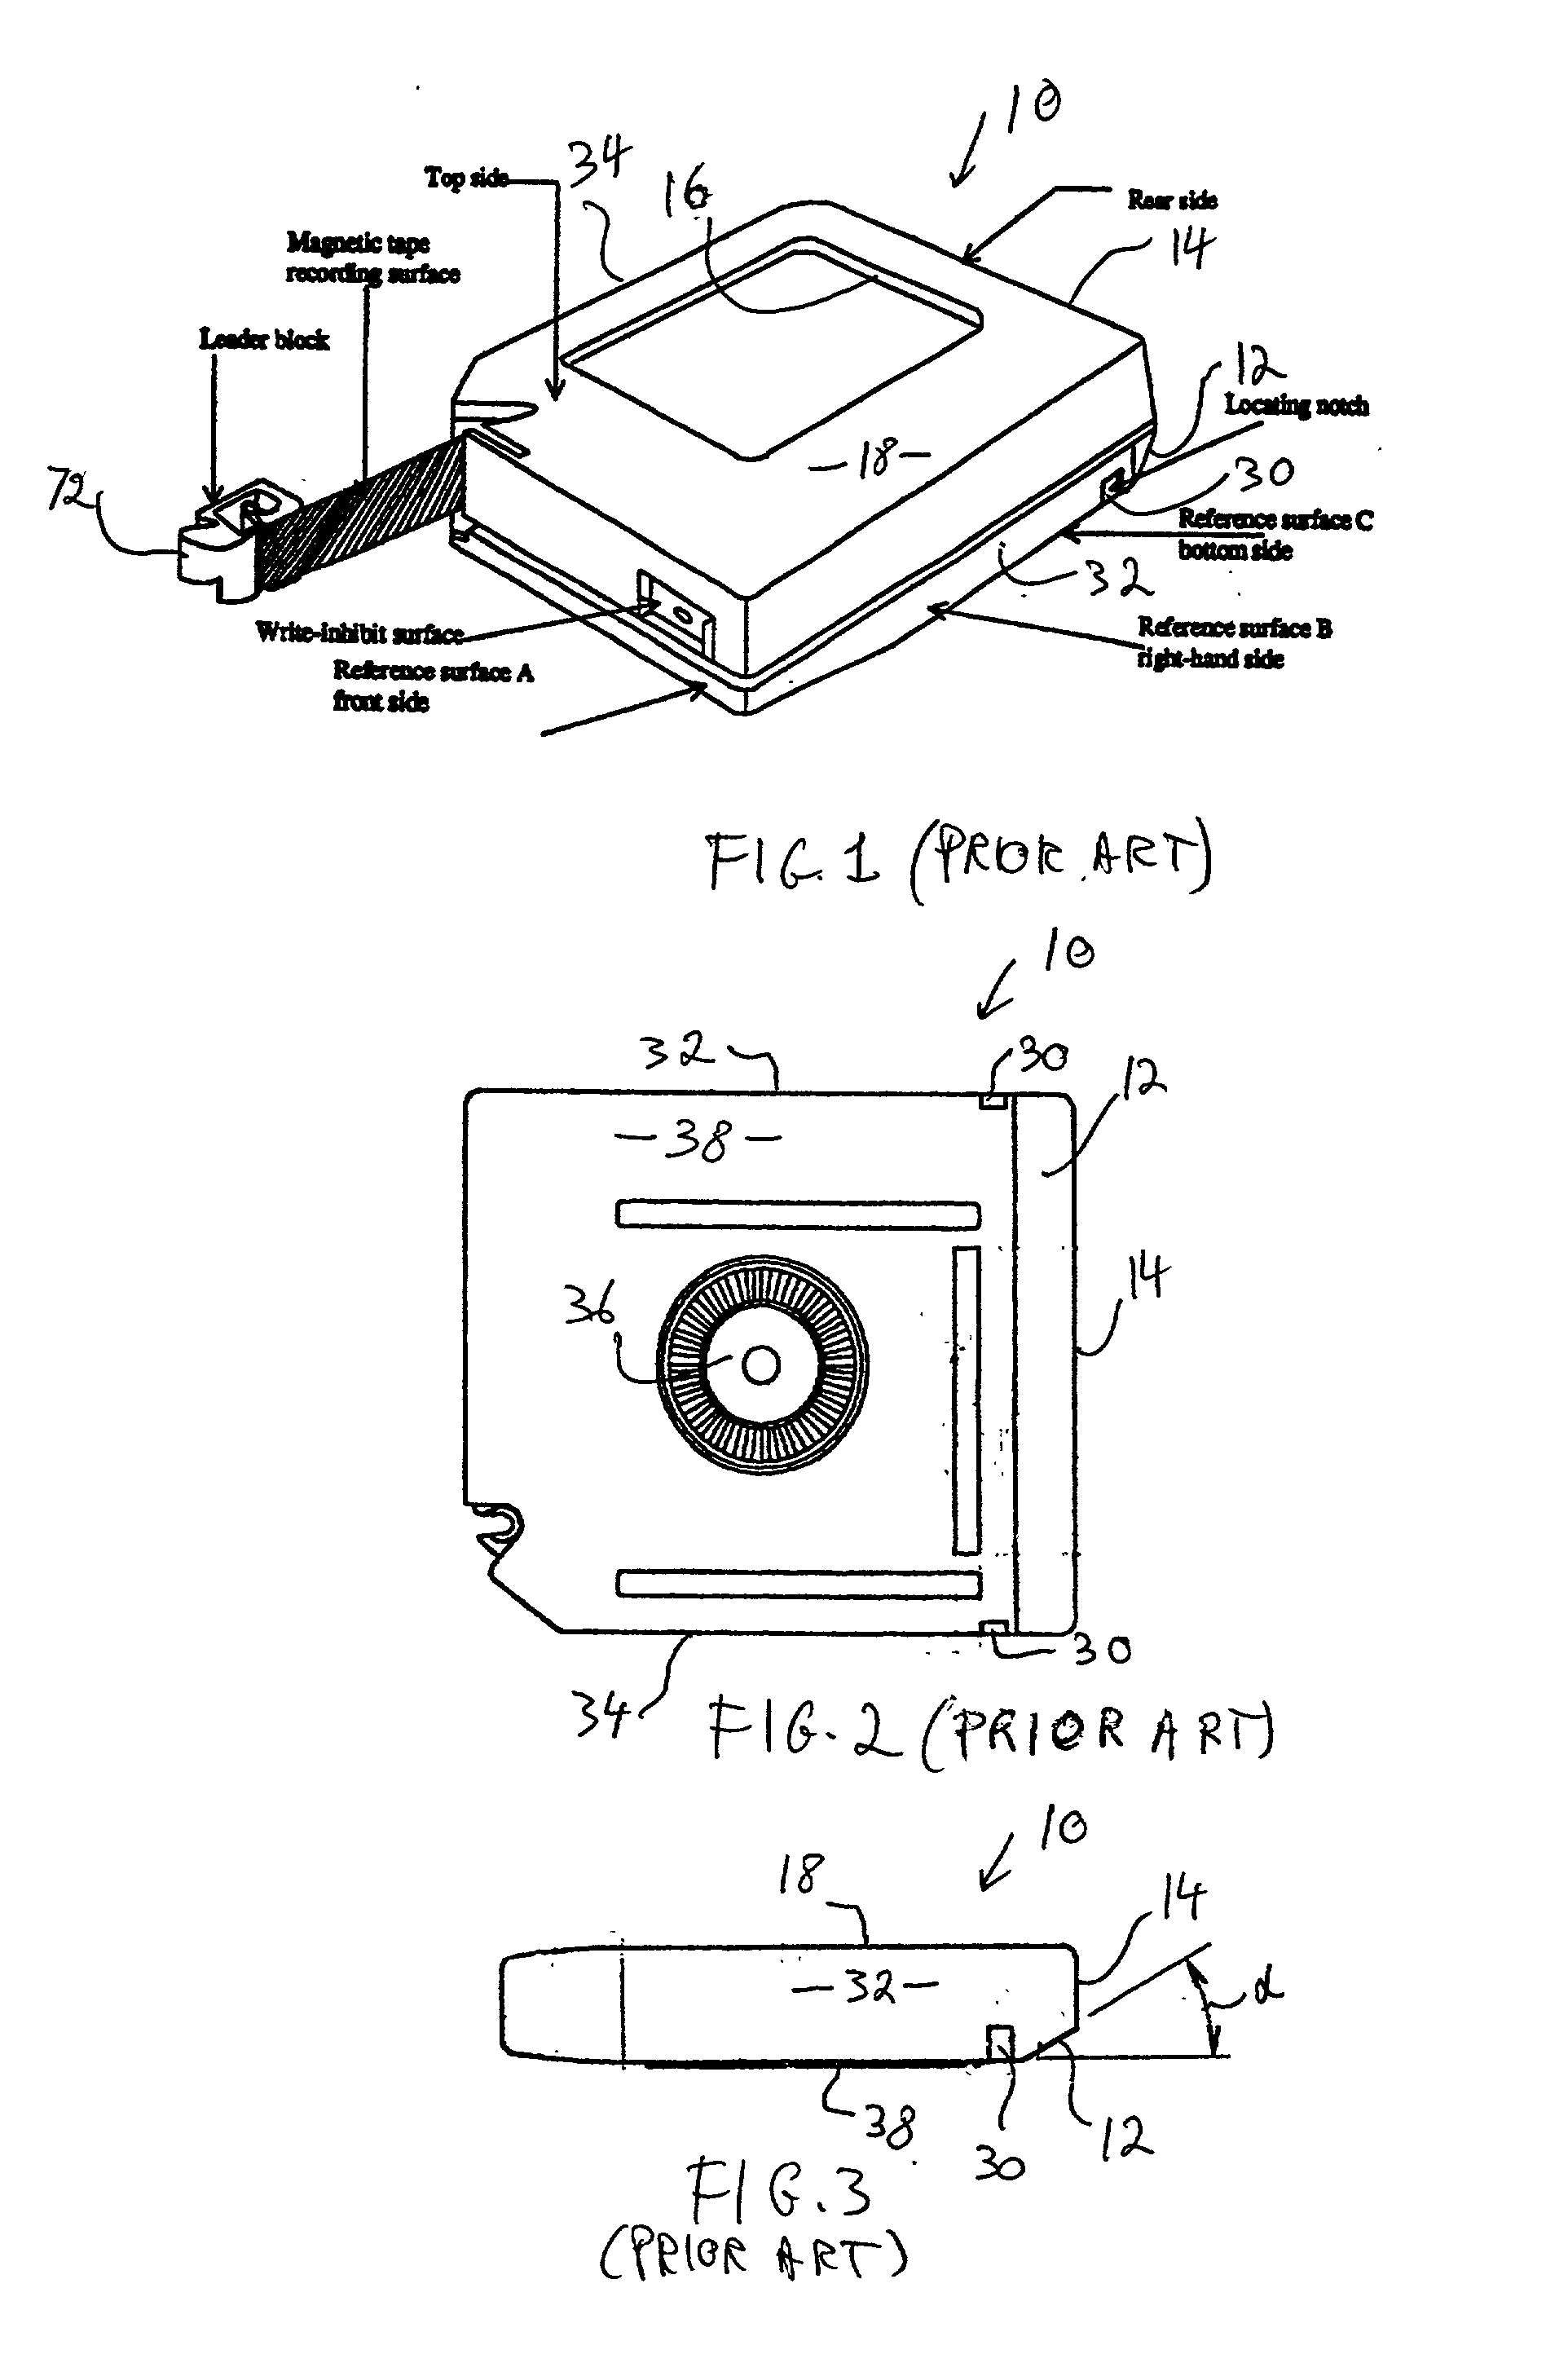 Data-cartridge case adapted for dual-format applications